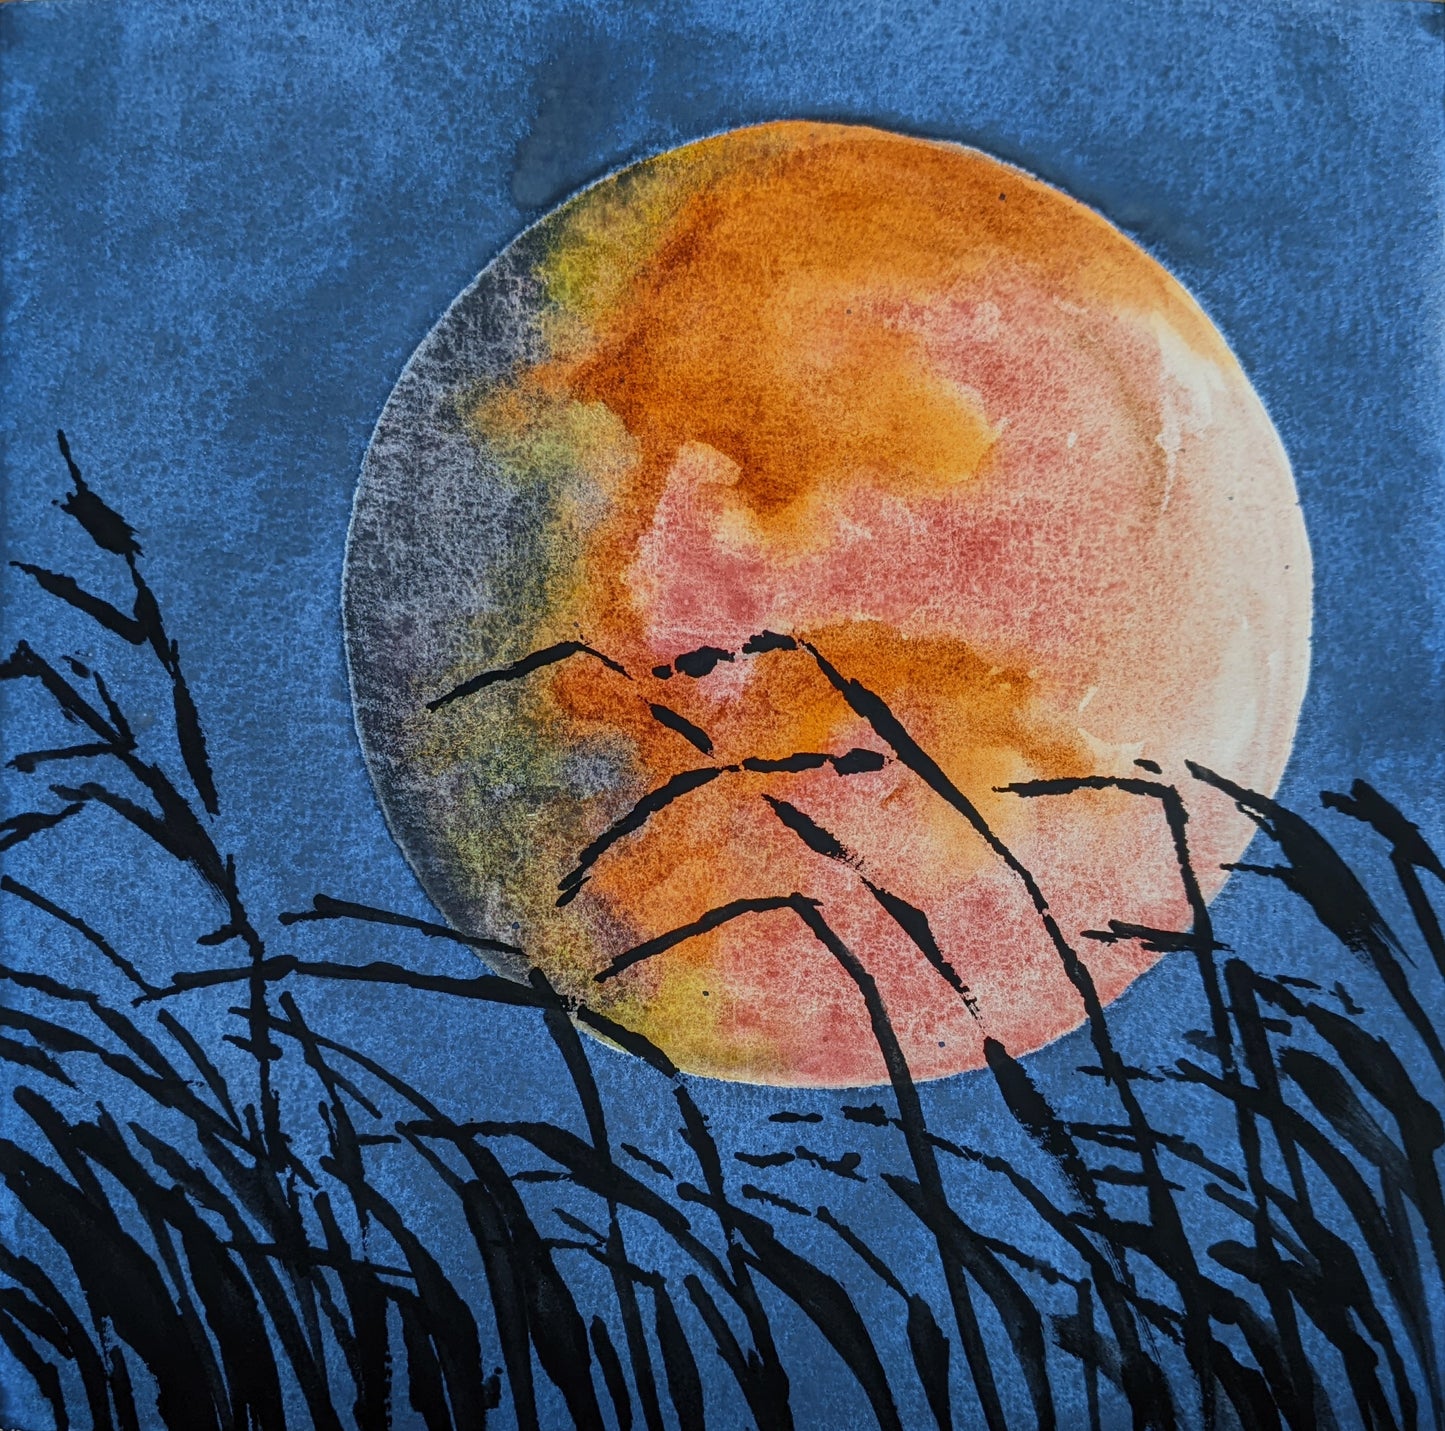 Harvest Moon behind the Wheat